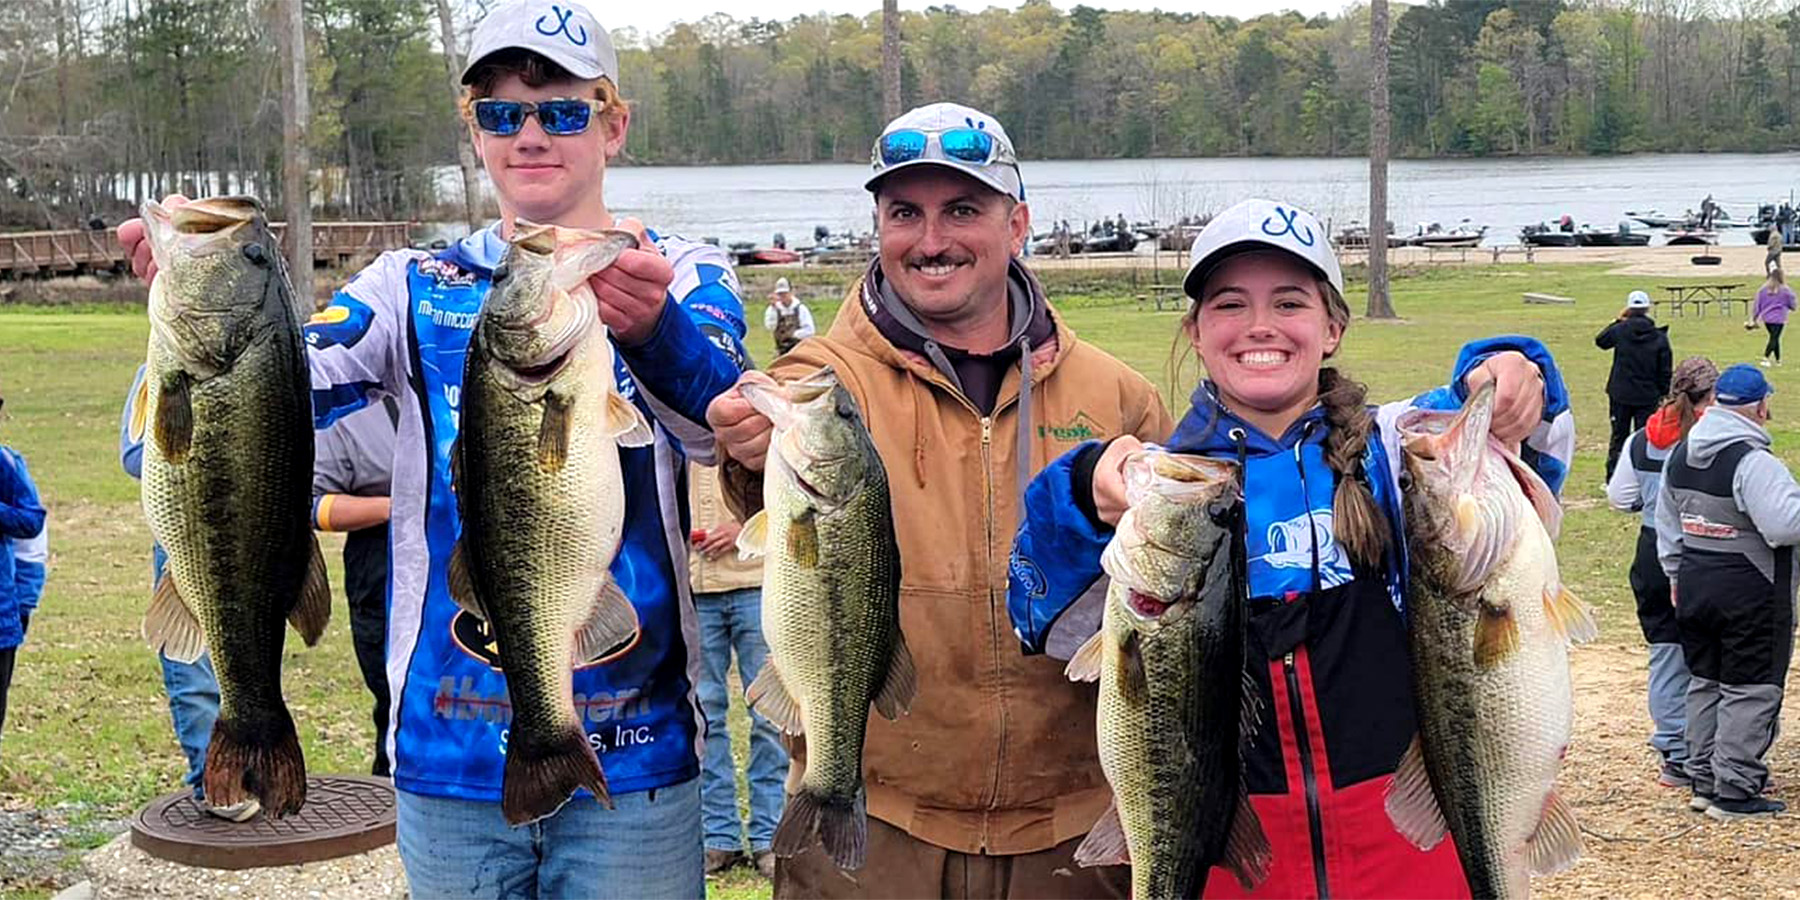 Teens Haul in Record Stringer at High School Bass Tourney